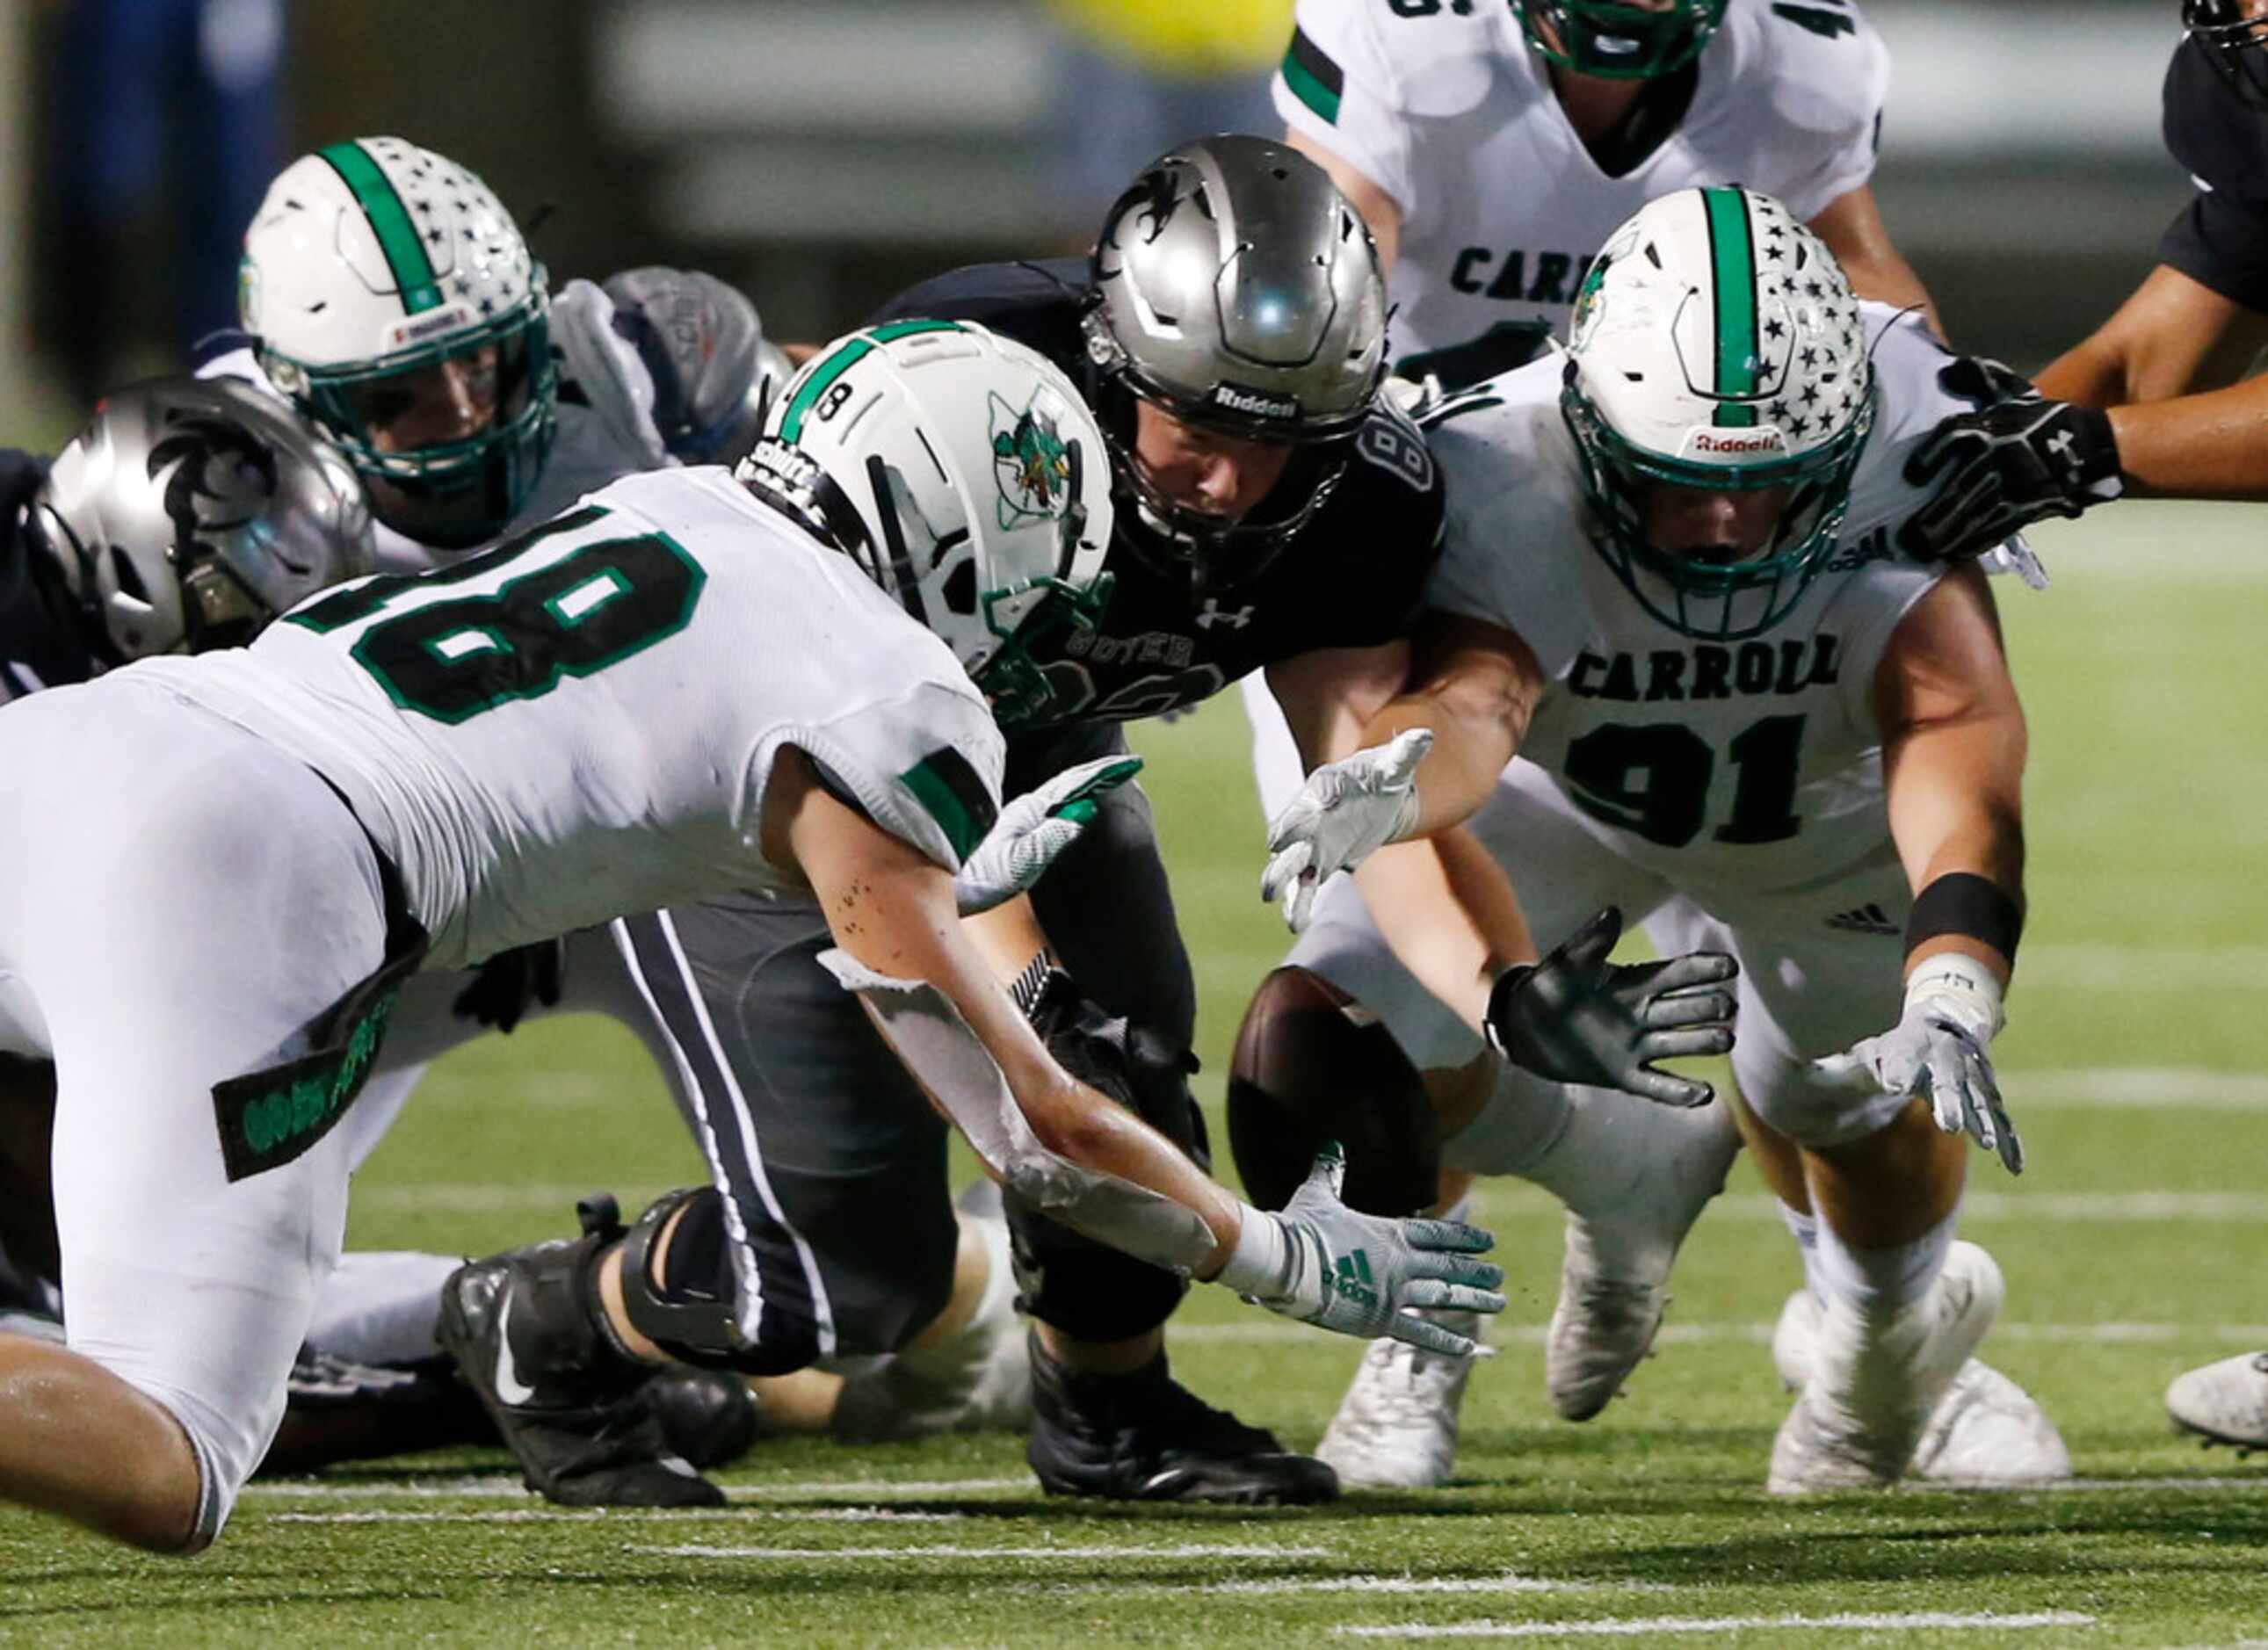 Southlake Carroll's Dillon Springer (91) dives for the fumbled ball and gains possession of...